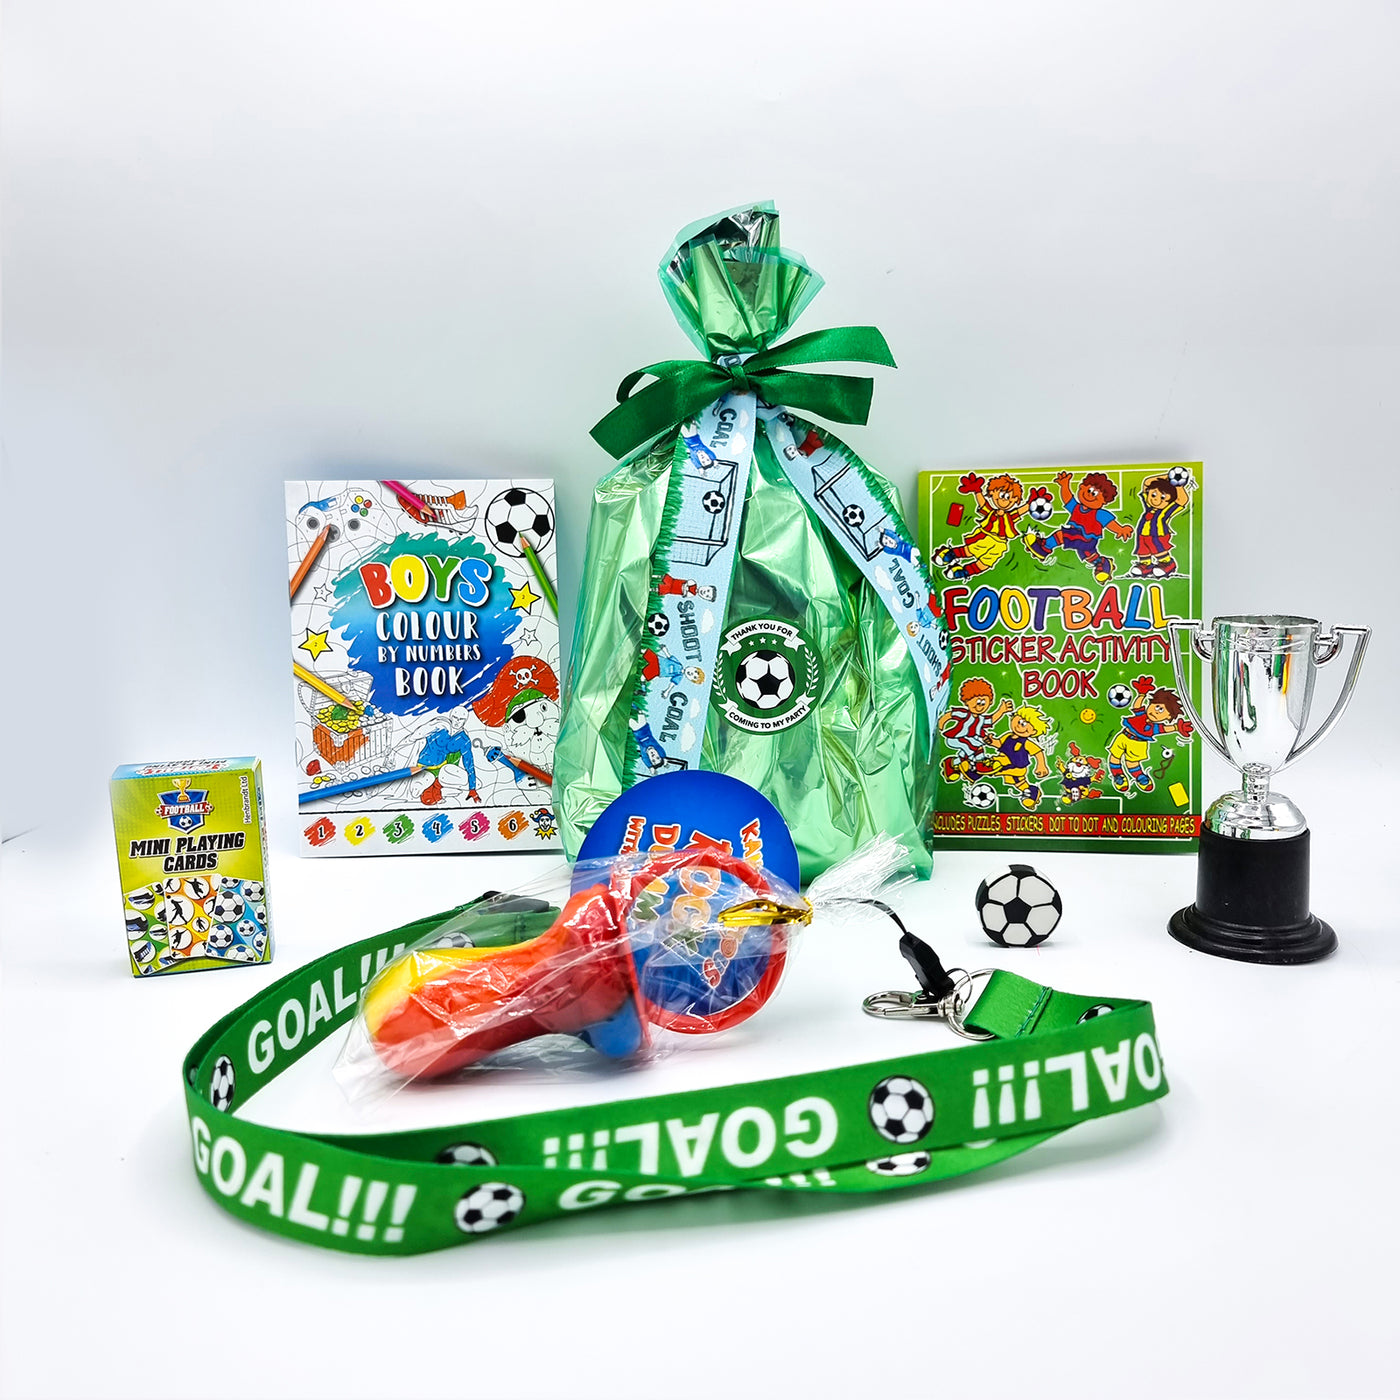 Pre-filled Boys Green Gold Football Party Goody Bags With Toys And Vegan Sweets.